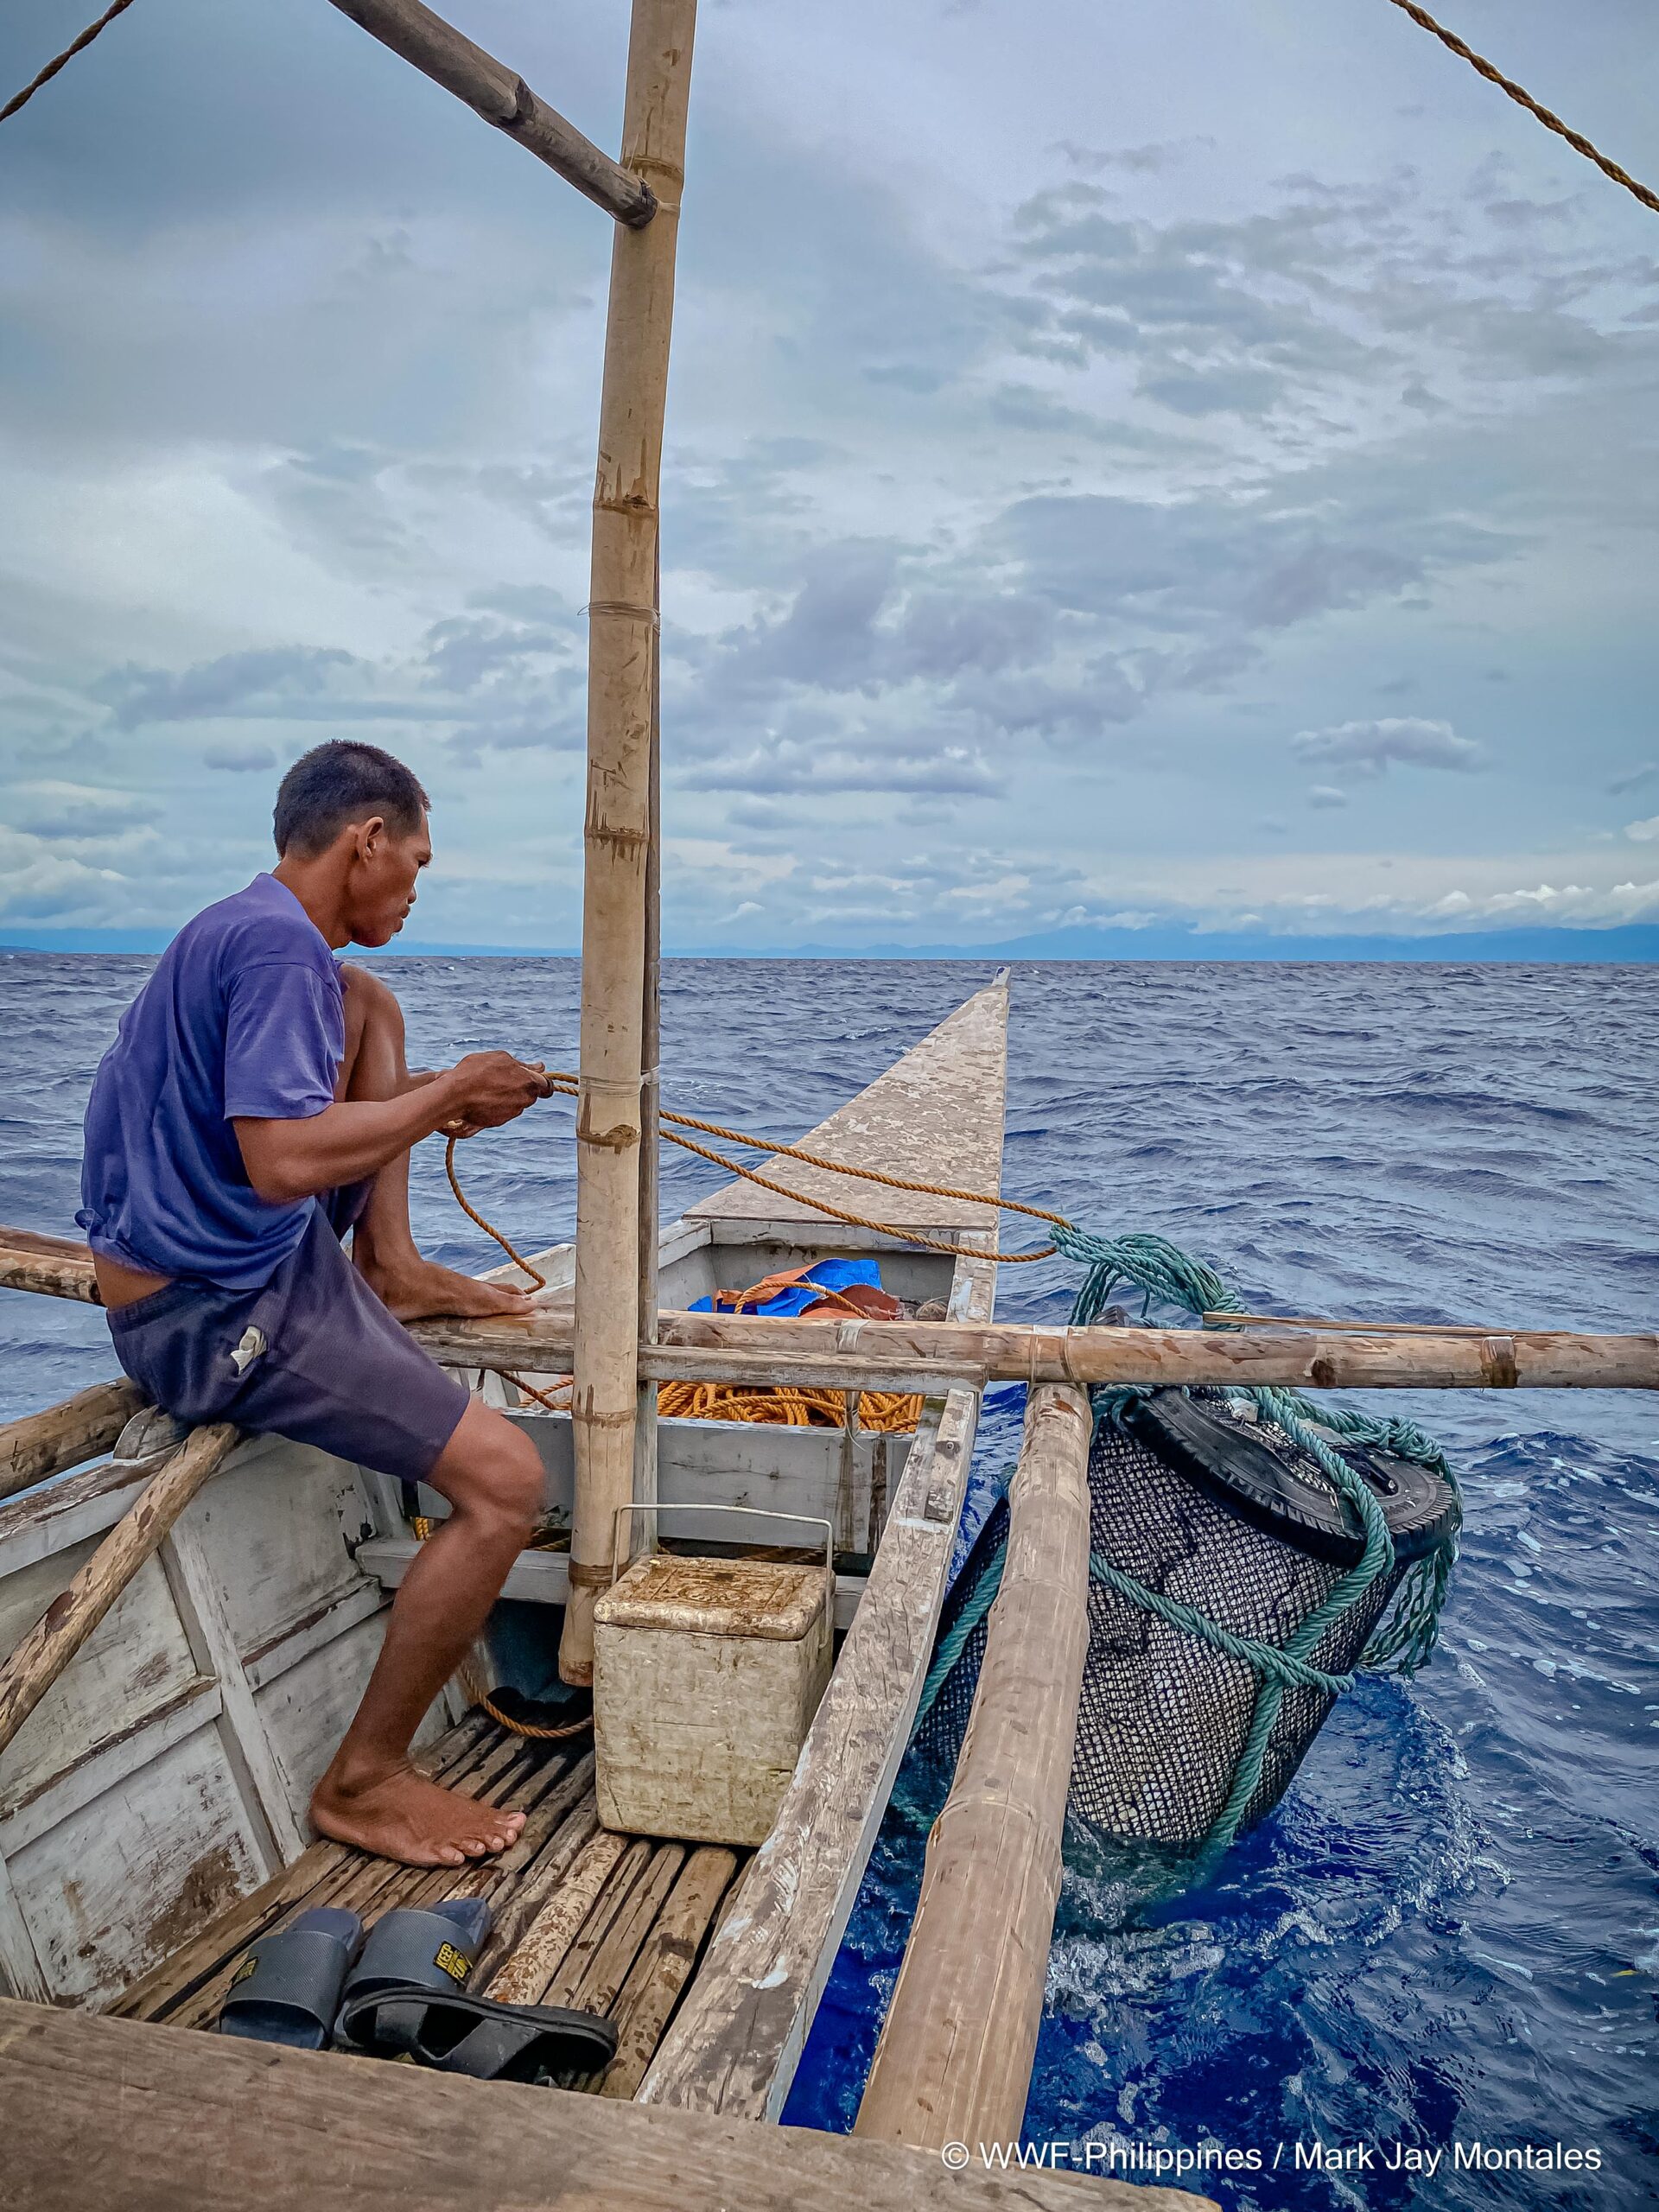 A fisher reels in a FAD. Though FADs make fishing easier, their usage can have negative impacts on marine ecosystems.